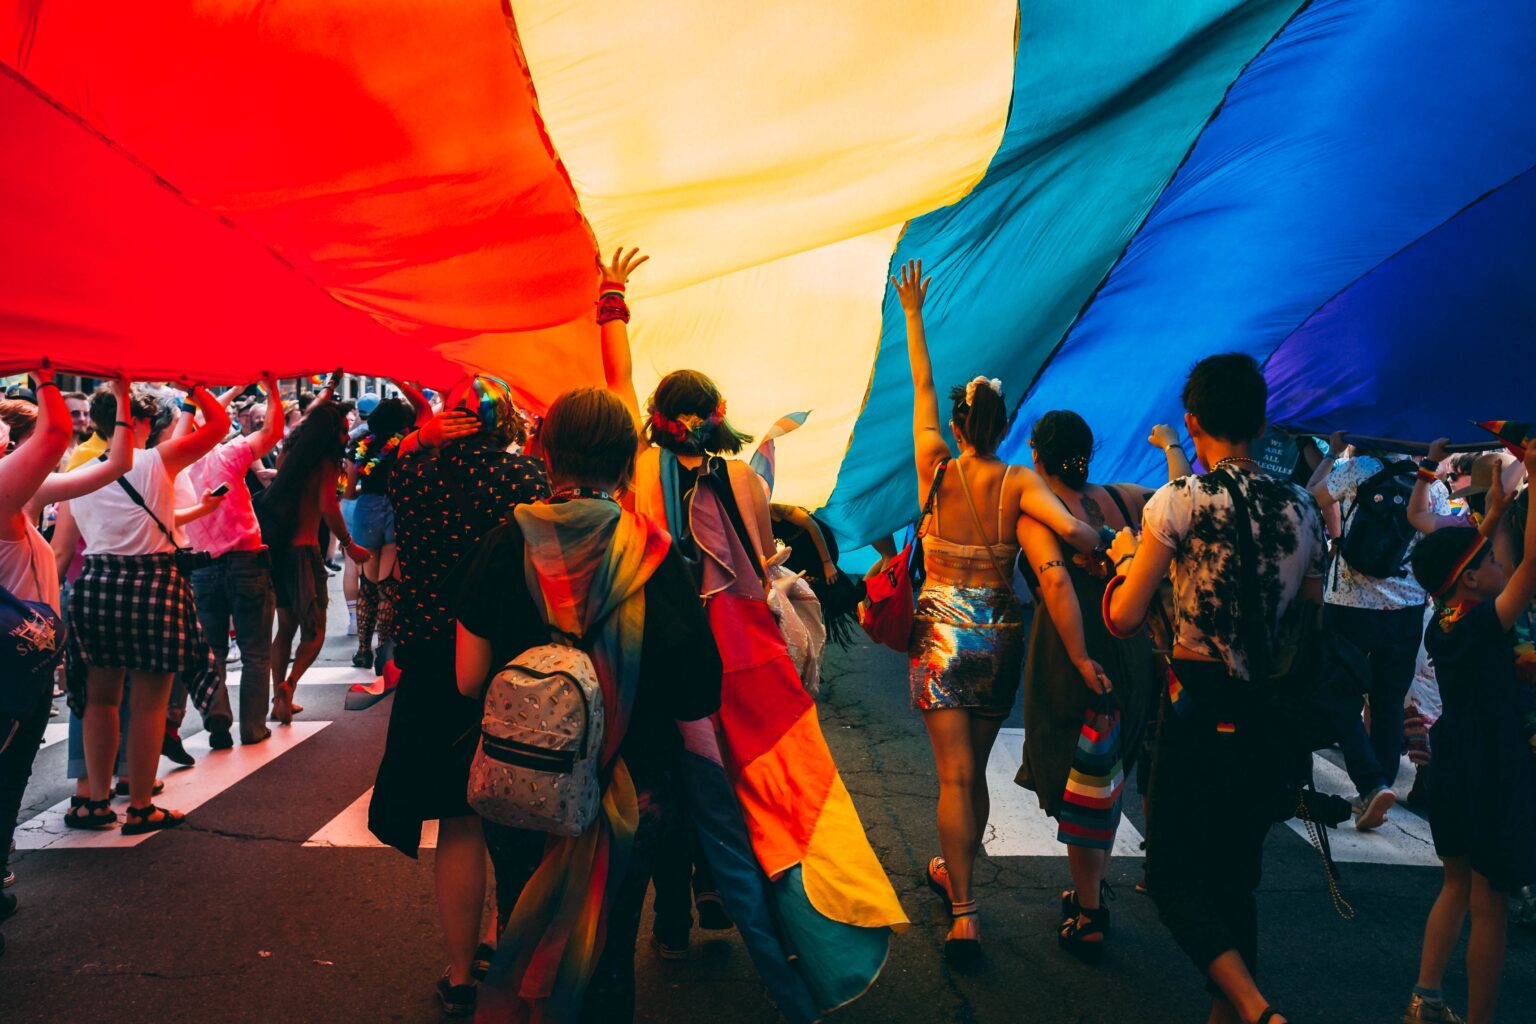 A group of people seen from the back marching under a rainbow flag